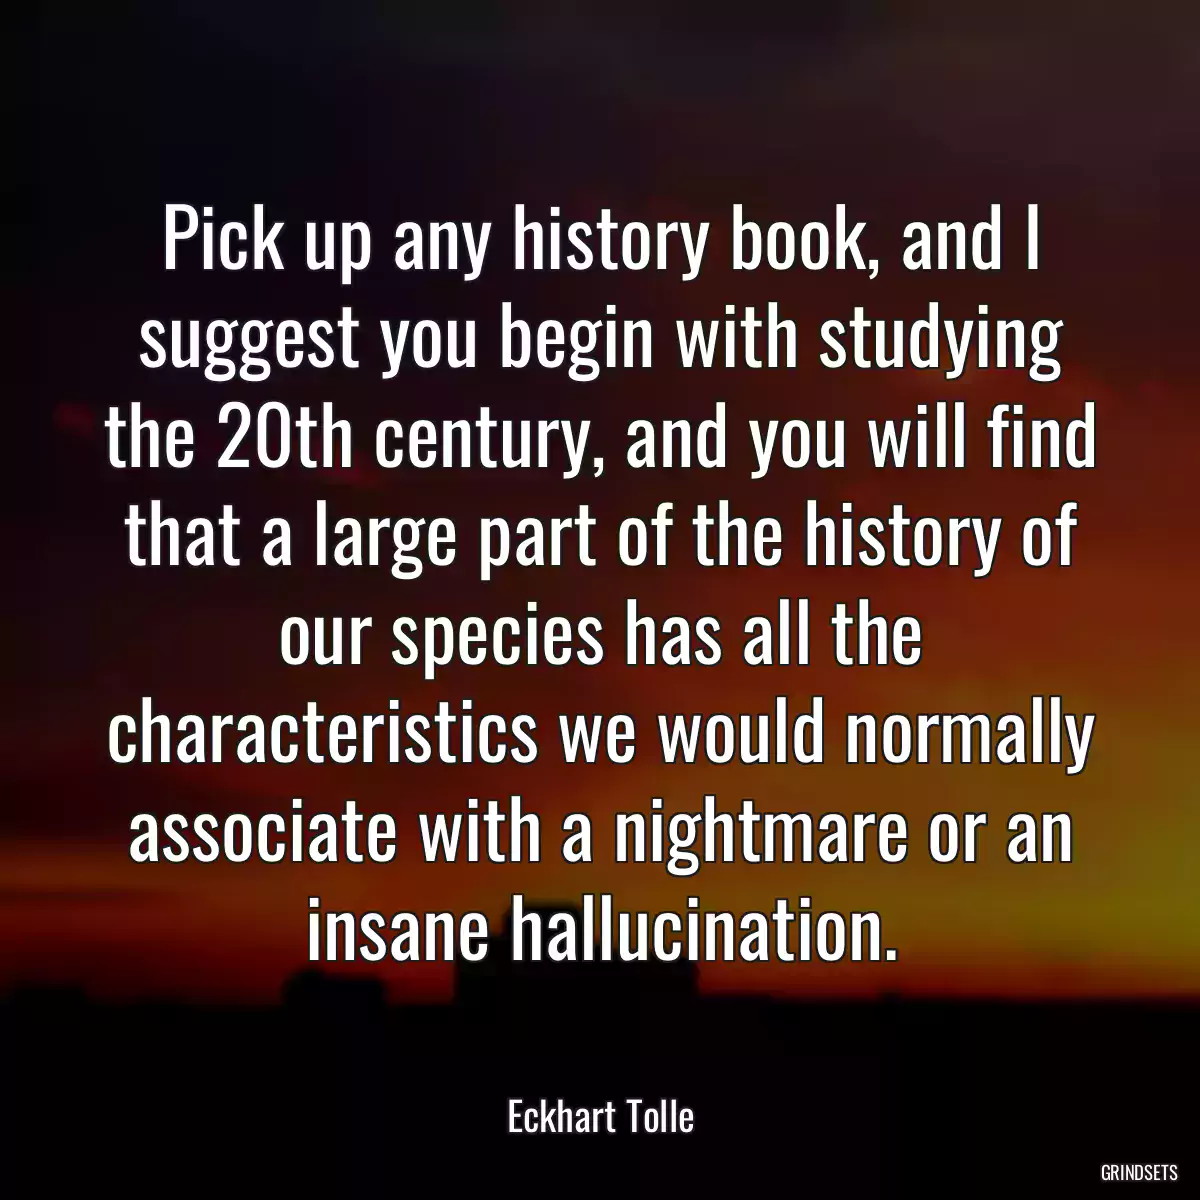 Pick up any history book, and I suggest you begin with studying the 20th century, and you will find that a large part of the history of our species has all the characteristics we would normally associate with a nightmare or an insane hallucination.